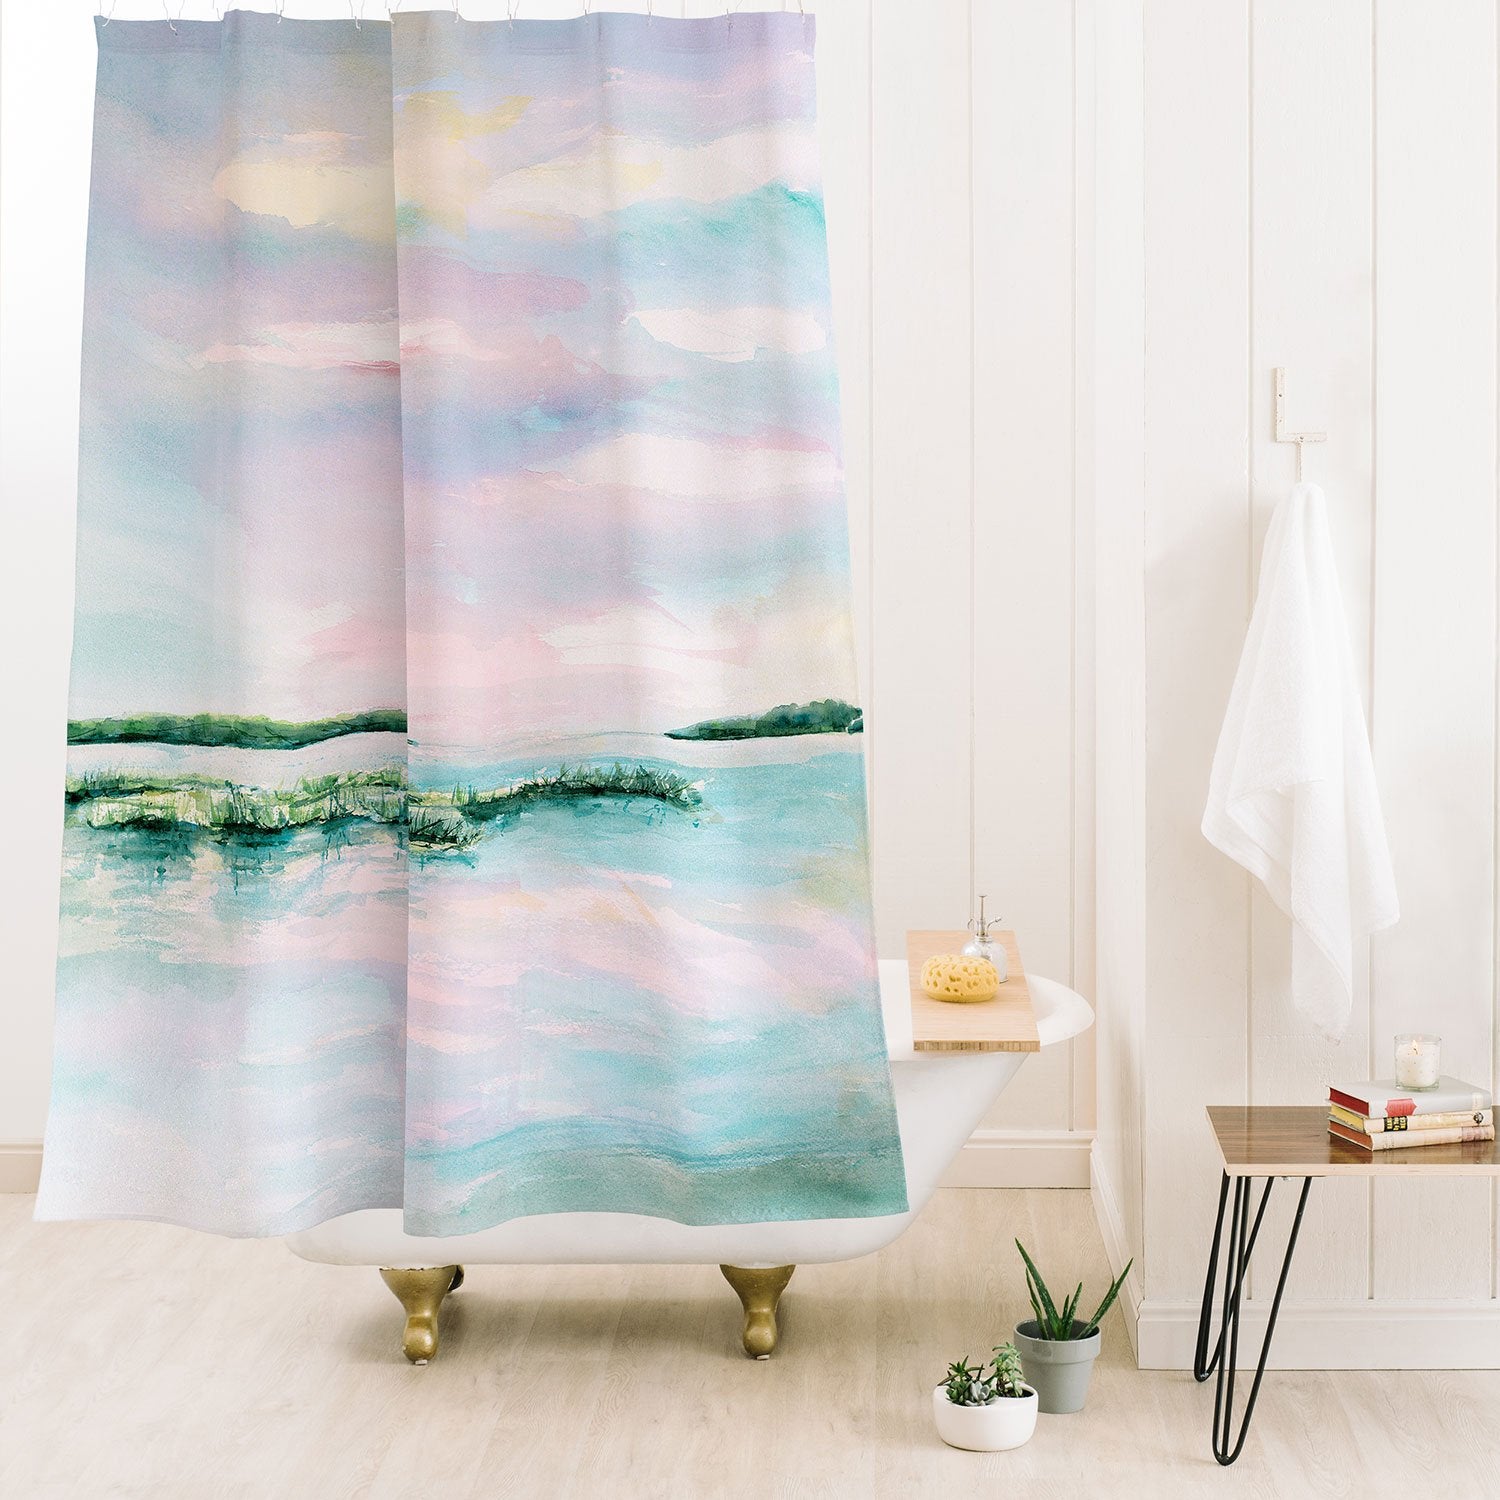 Cotton Candy Skies Shower Curtain